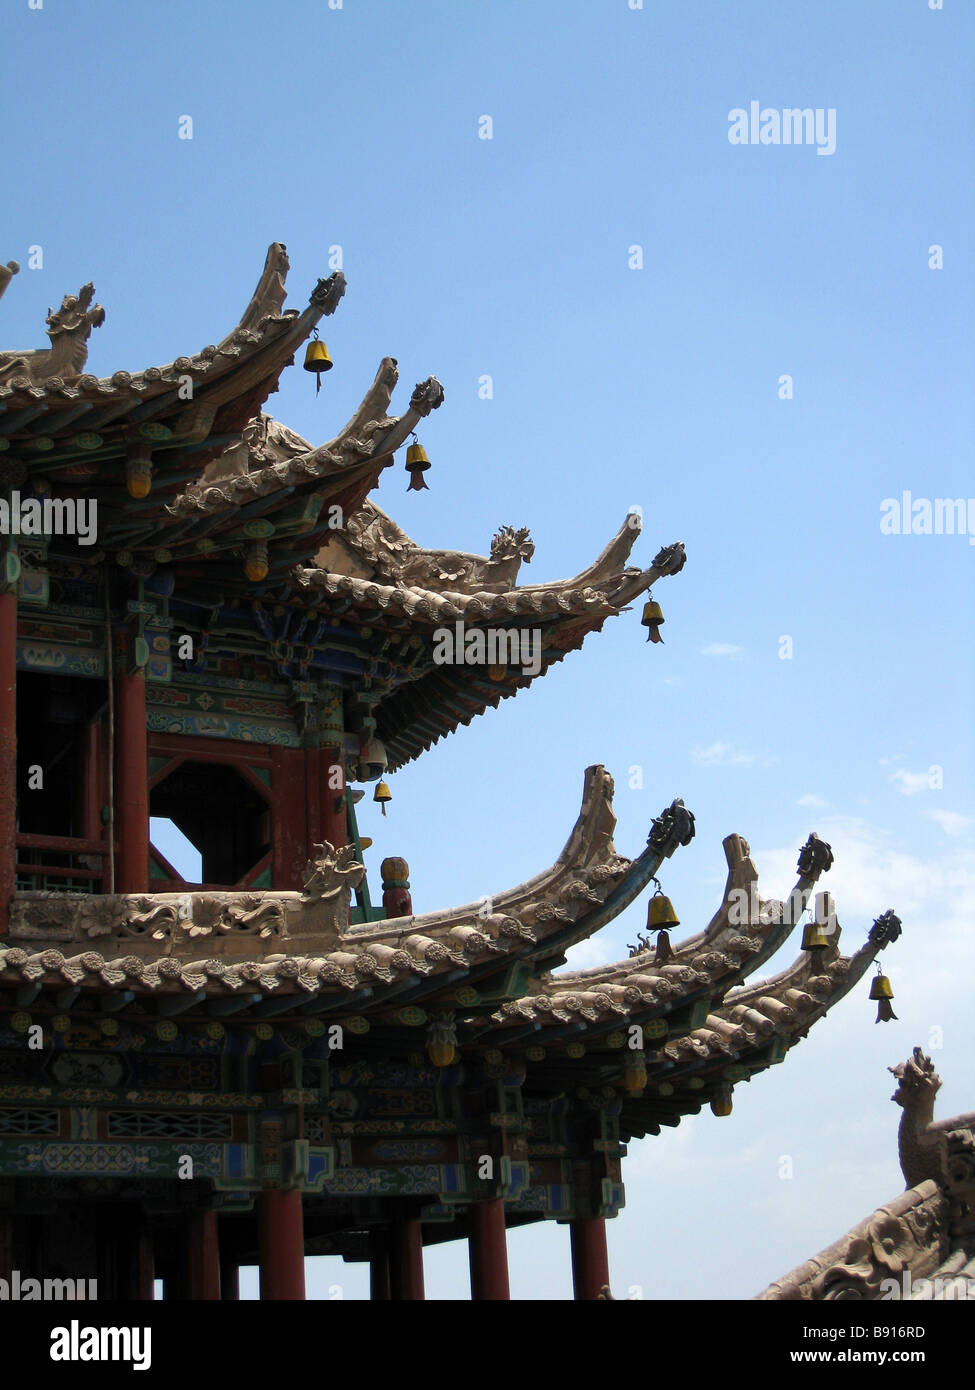 Detail of pagoda roof at Buddhist temple in Northern China Stock Photo